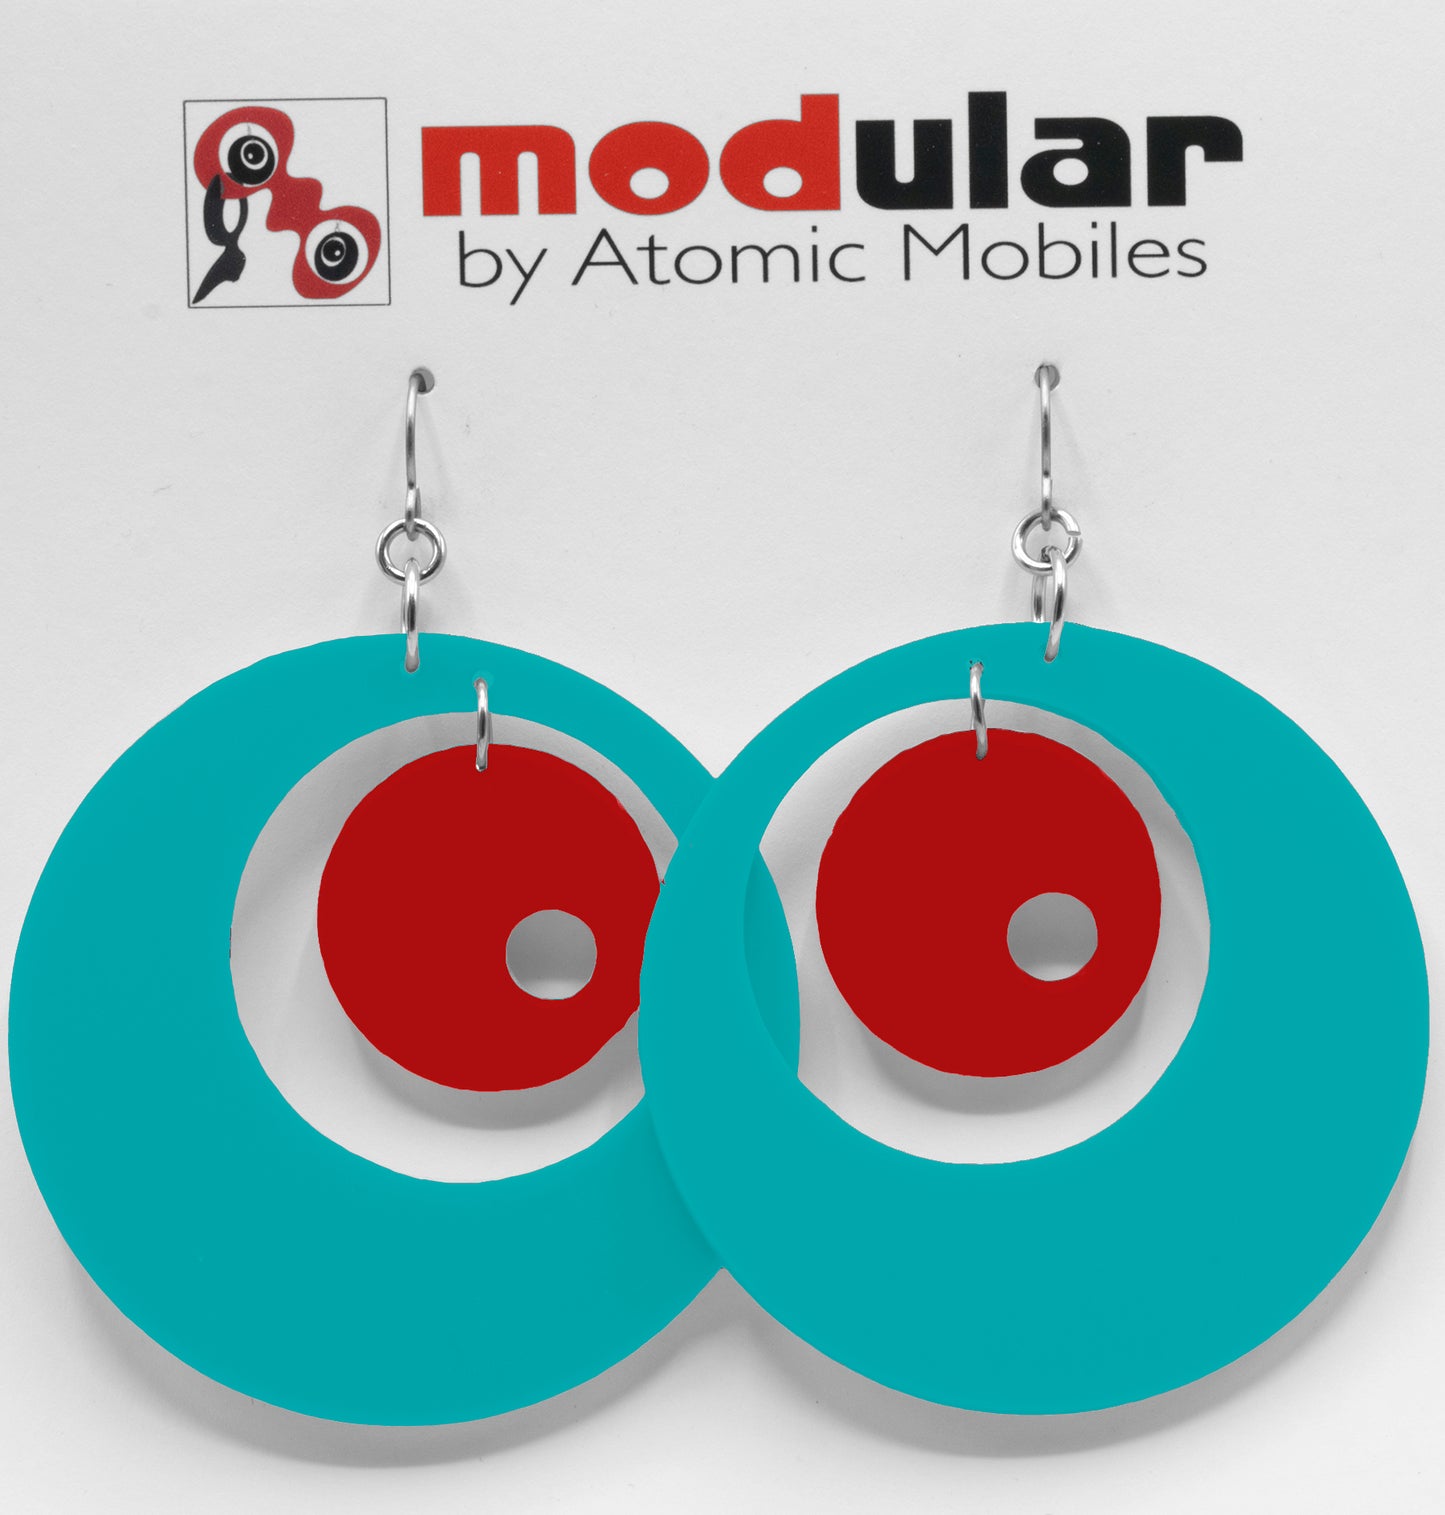 MODular Earrings - Groovy Statement Earrings in Aqua and Red by AtomicMobiles.com - retro era inspired mod handmade jewelry